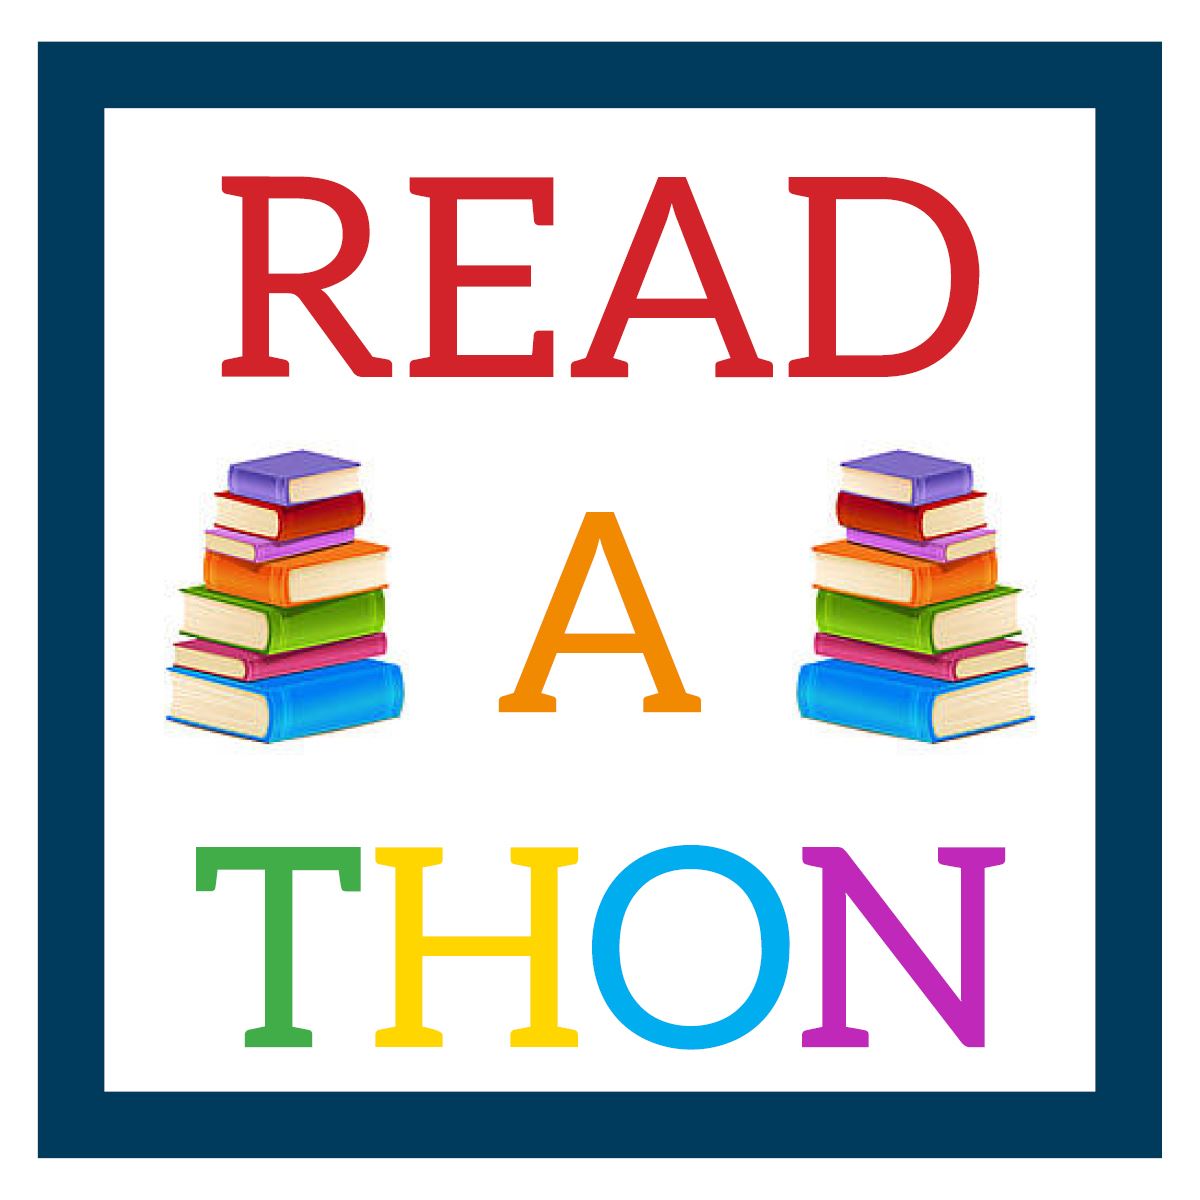 Room to Read India's read-a-thon event to be held in Dehradun on September 1